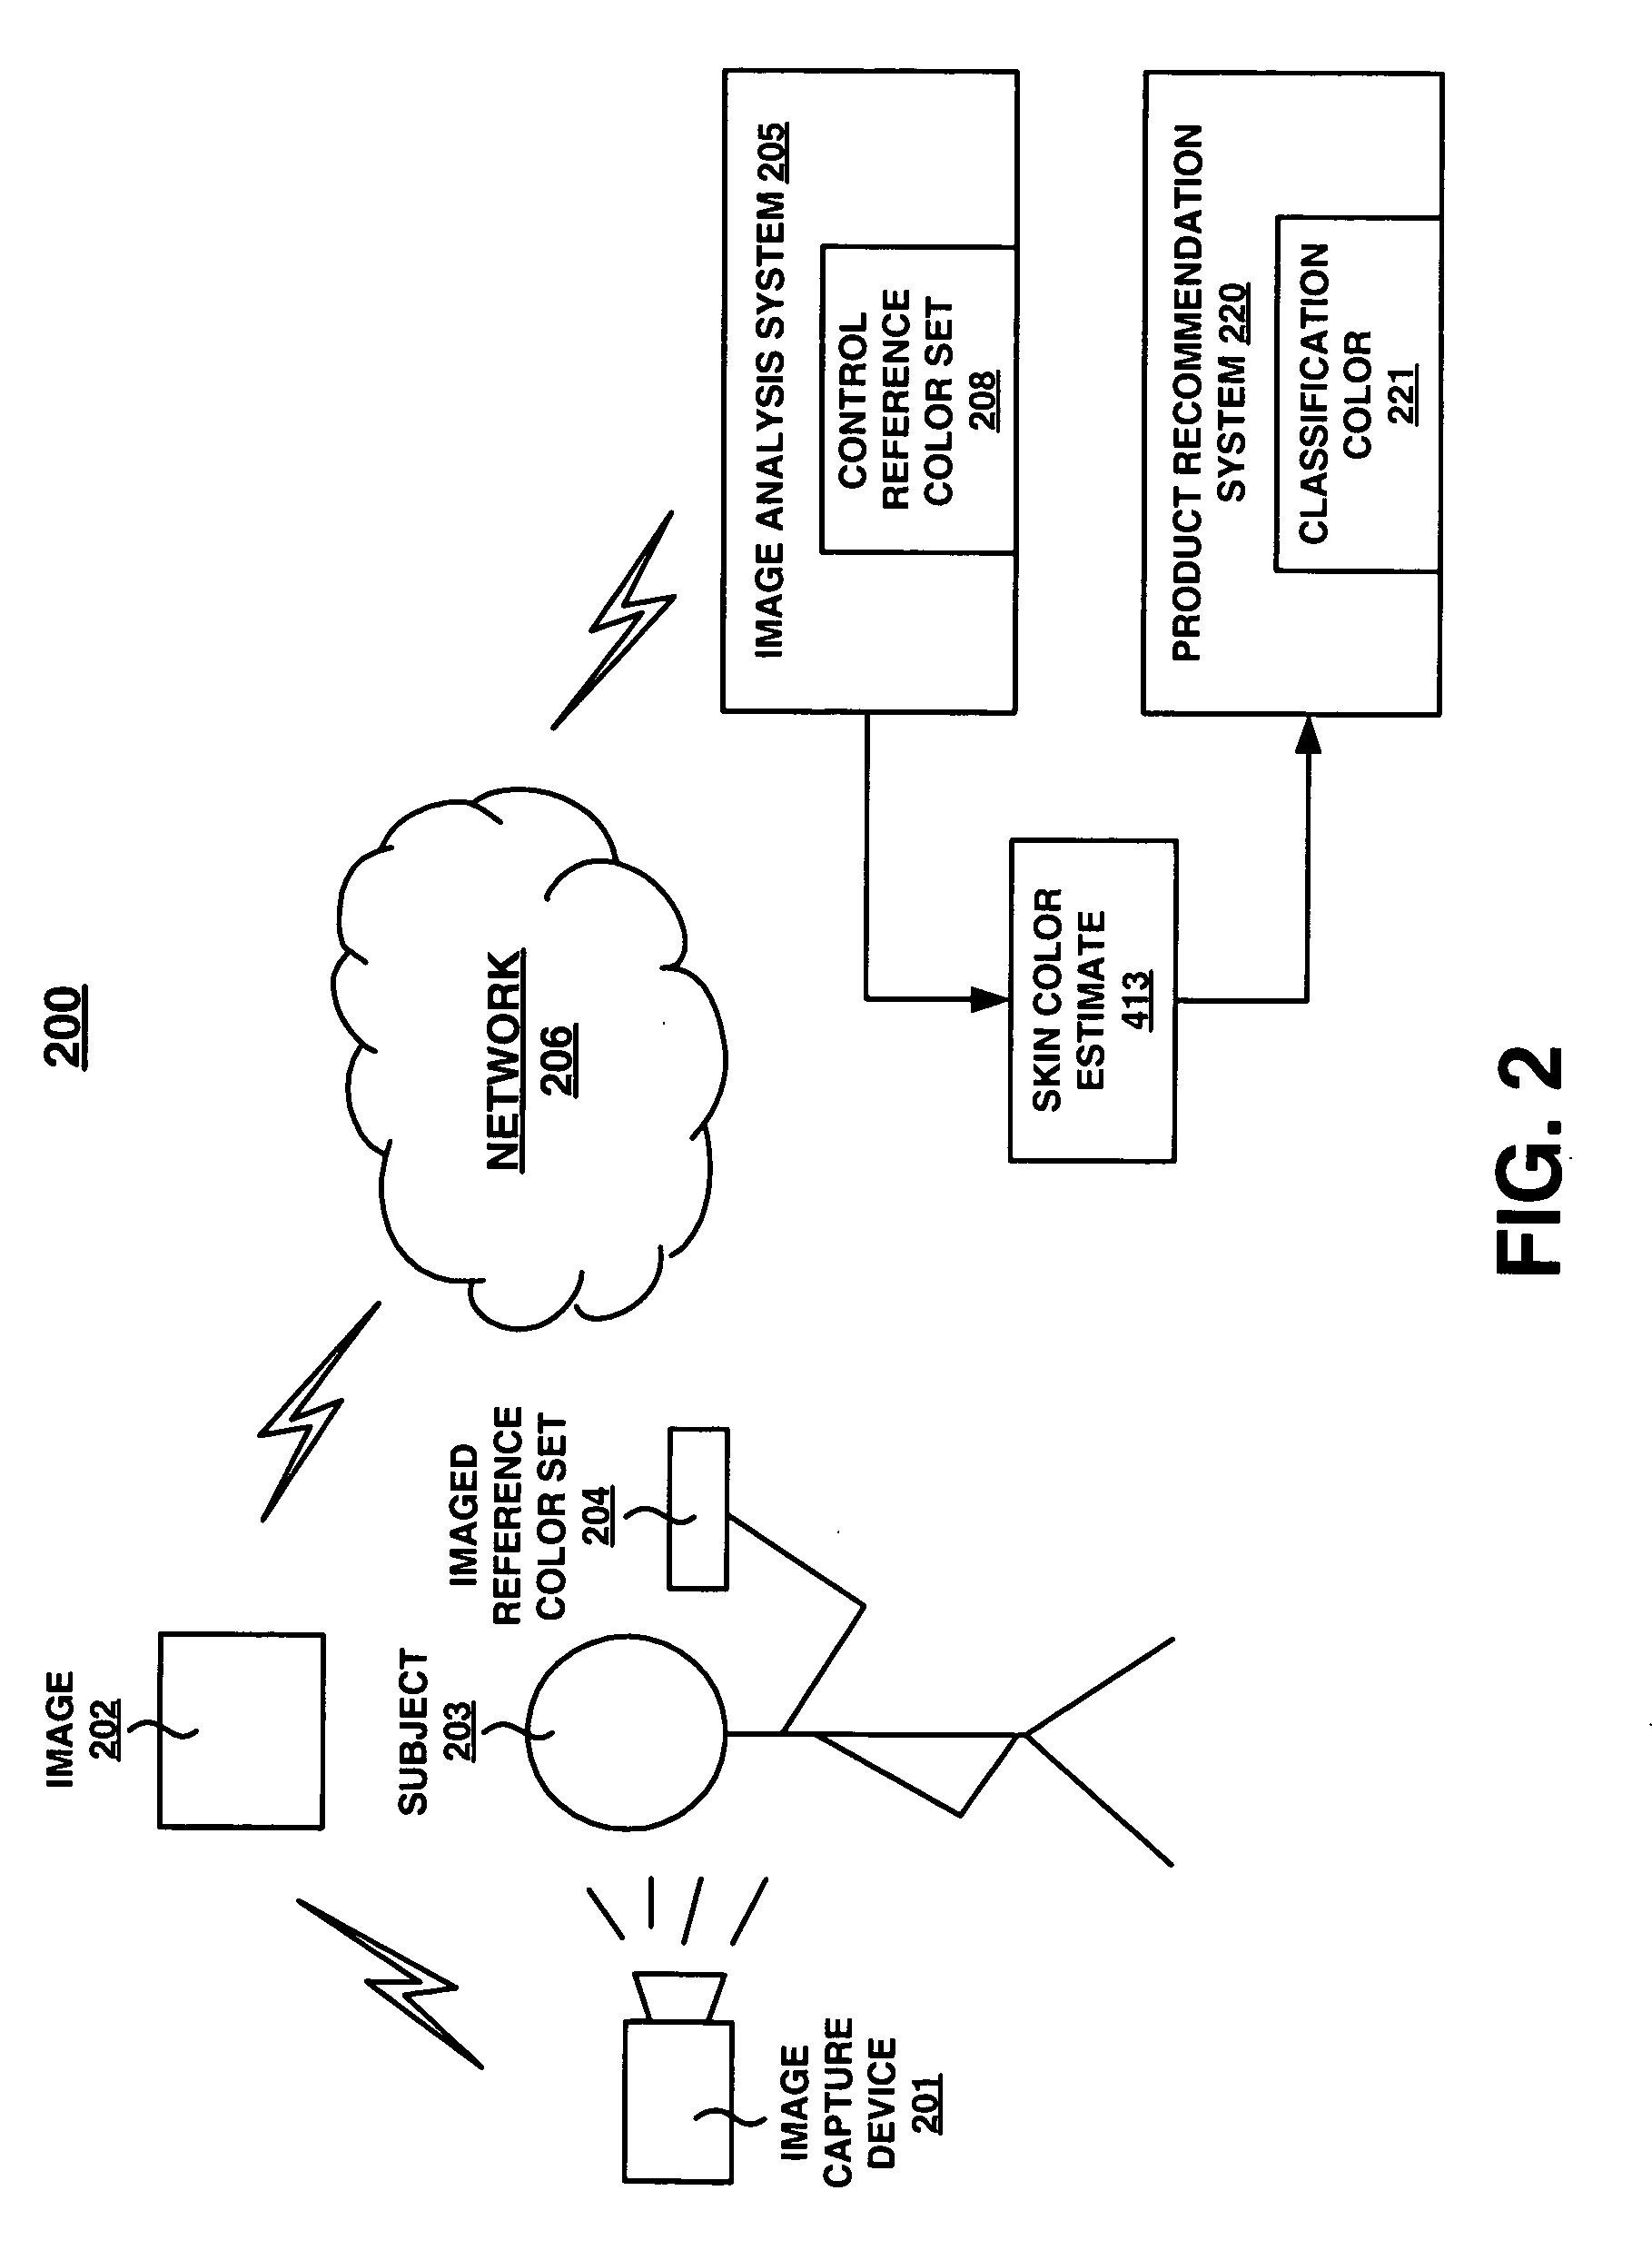 Method and system for recommending a product based upon skin color estimated from an image